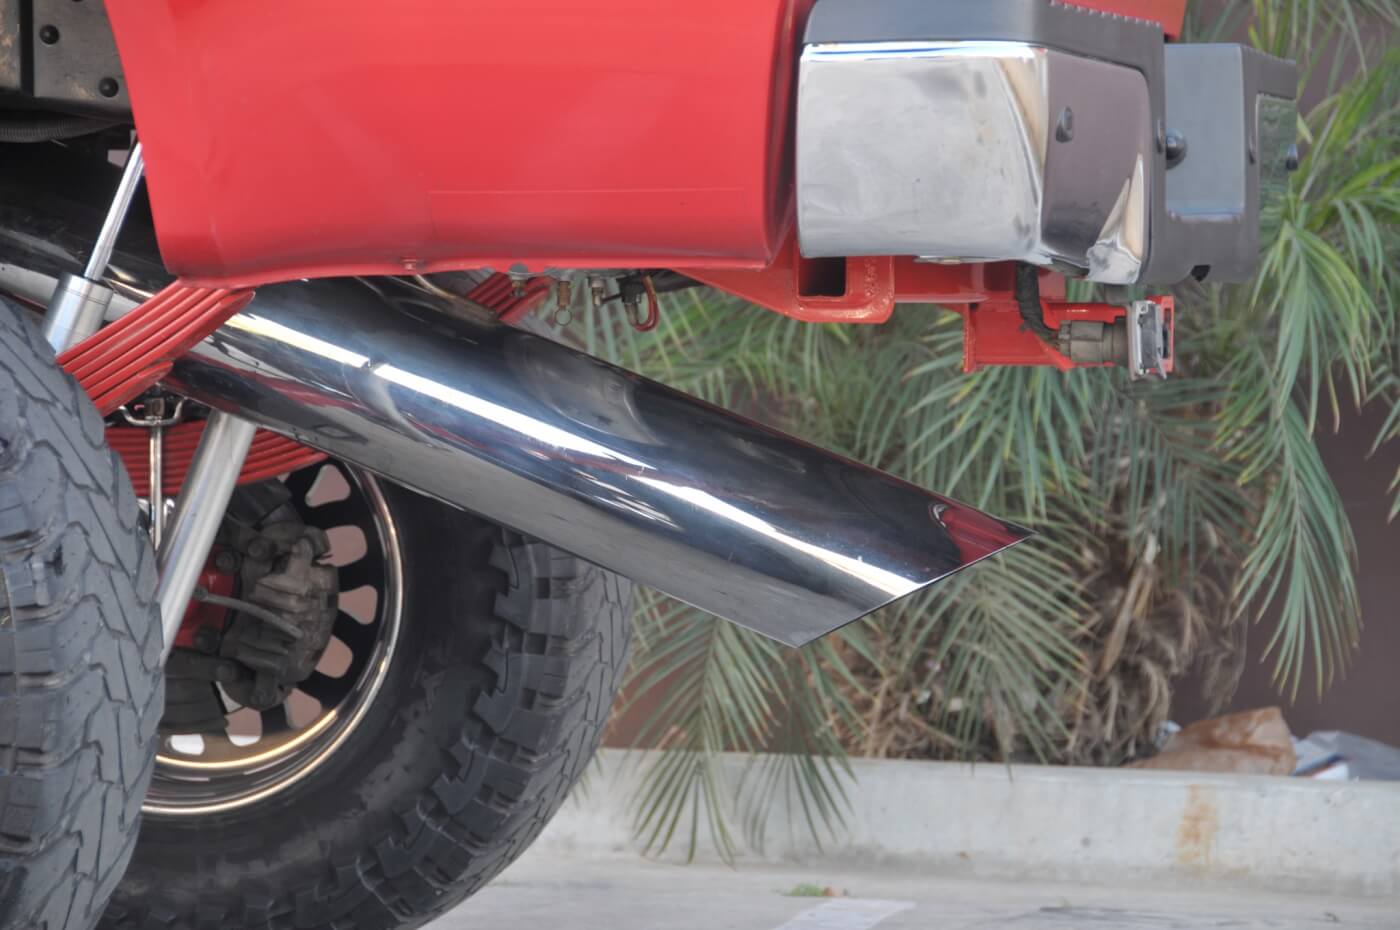 This might be the world’s biggest exhaust tip—it’s a big rig stack cut down and adapted to the 4-inch MBRP exhaust system.